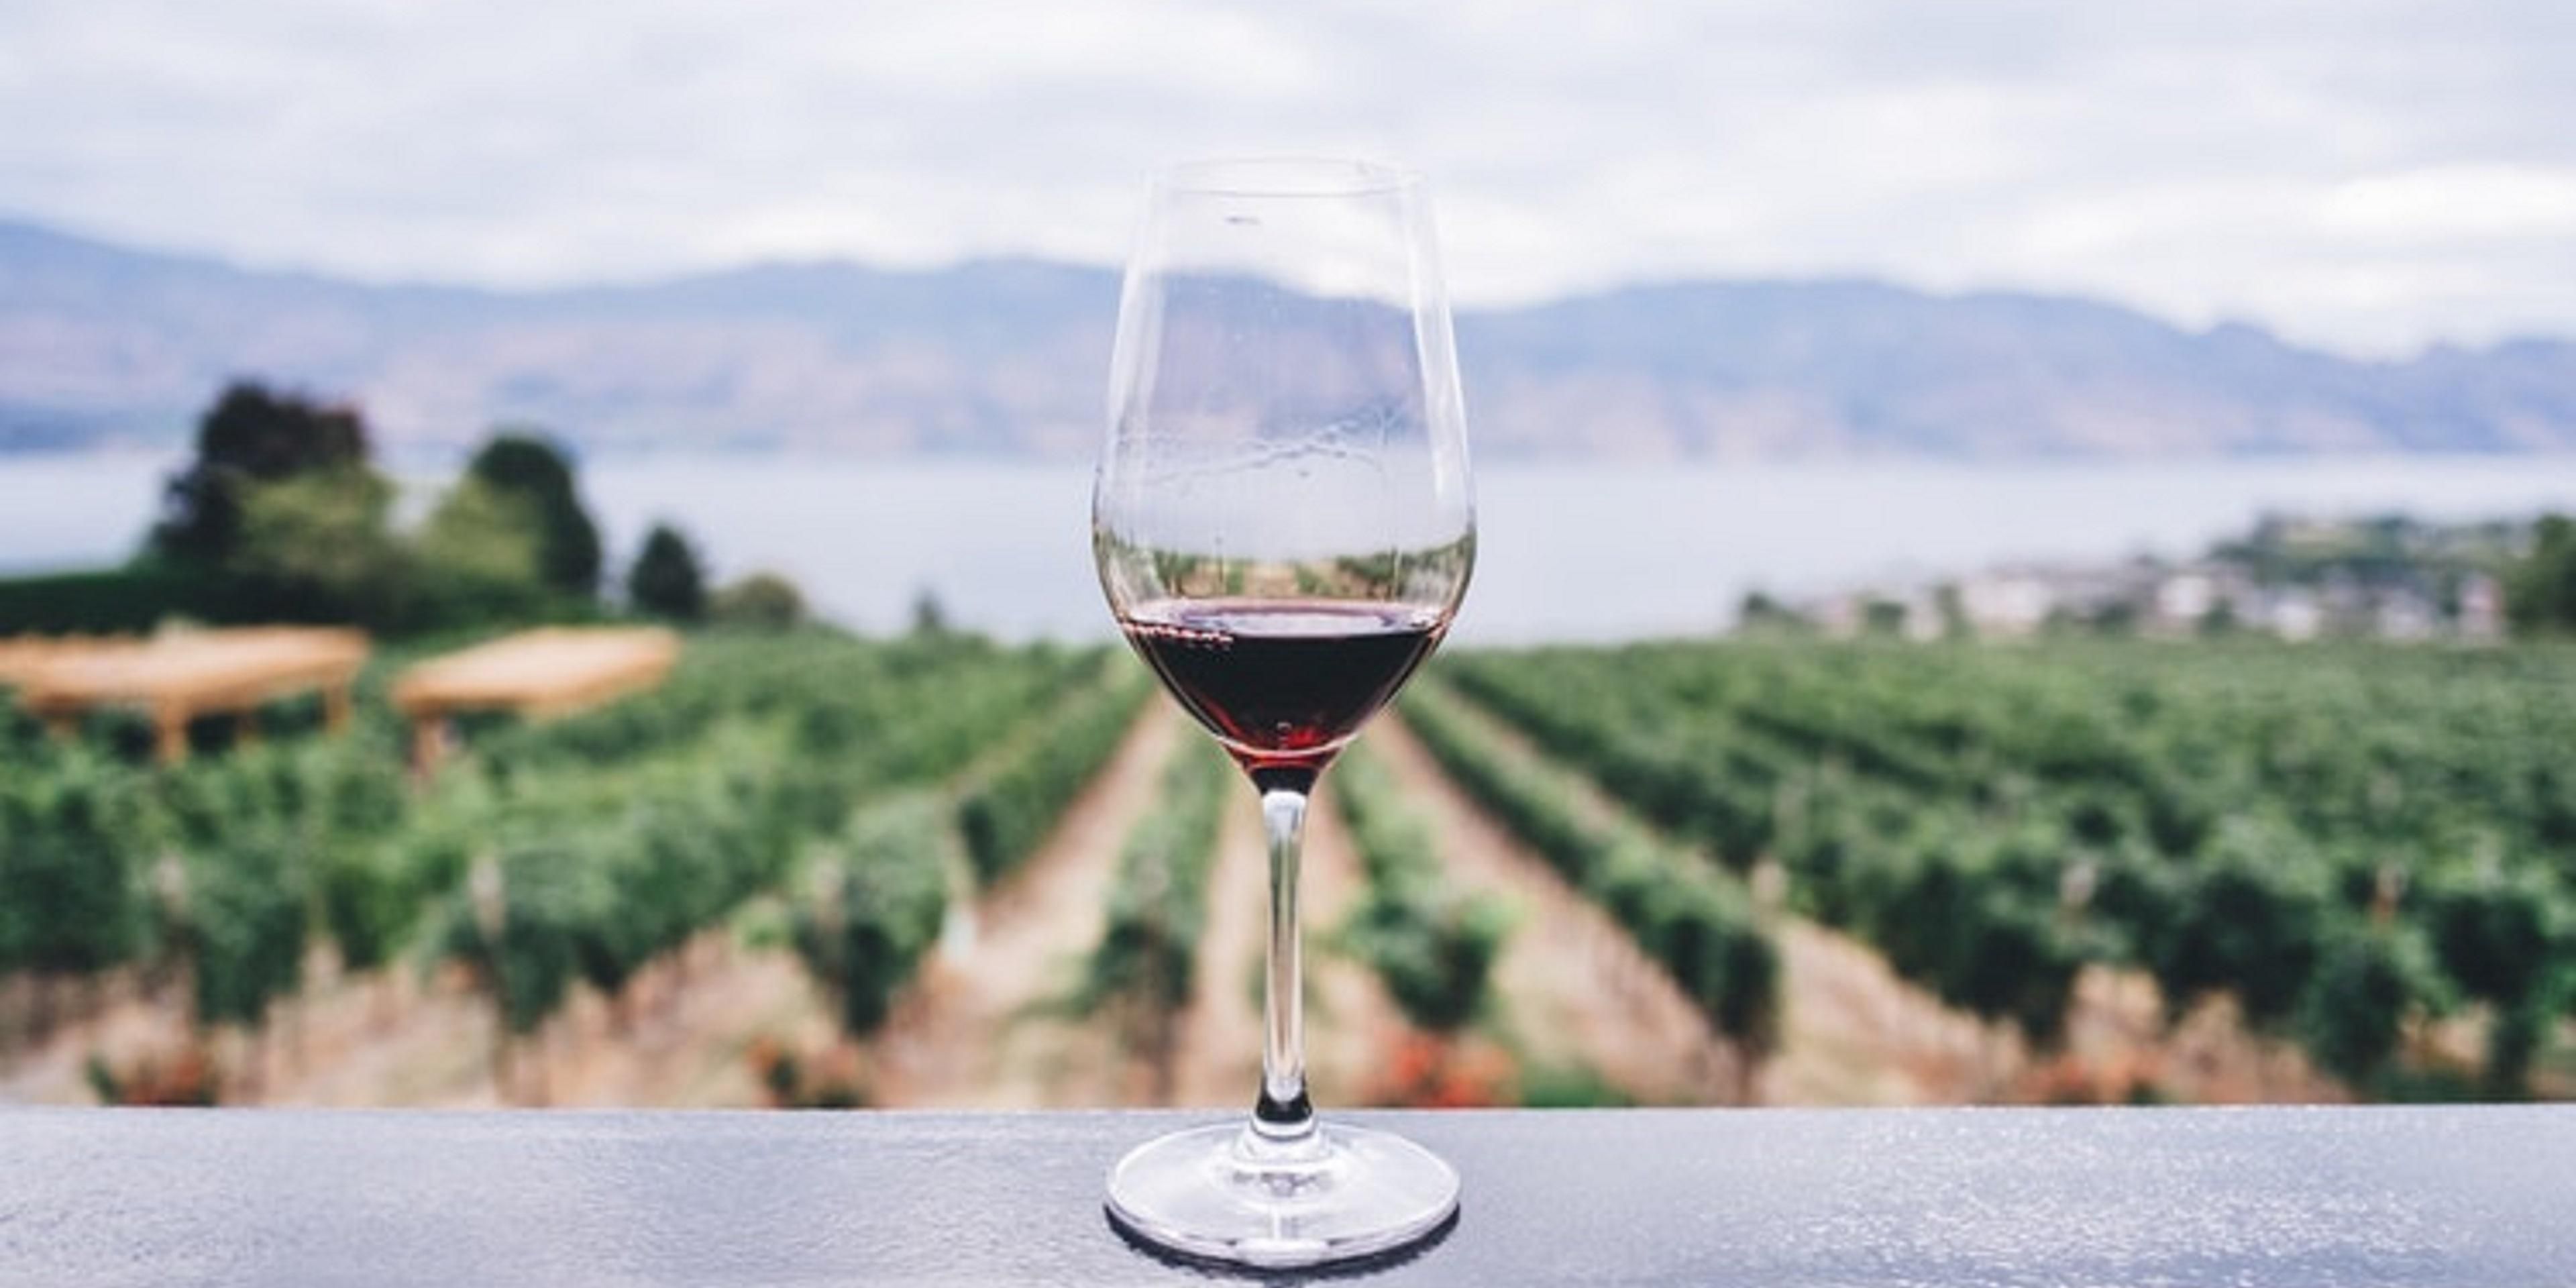 Looking for wine tastings and food truck pairings? Head 10 minutes over to Chaddsford Winery and prepare to be delighted.